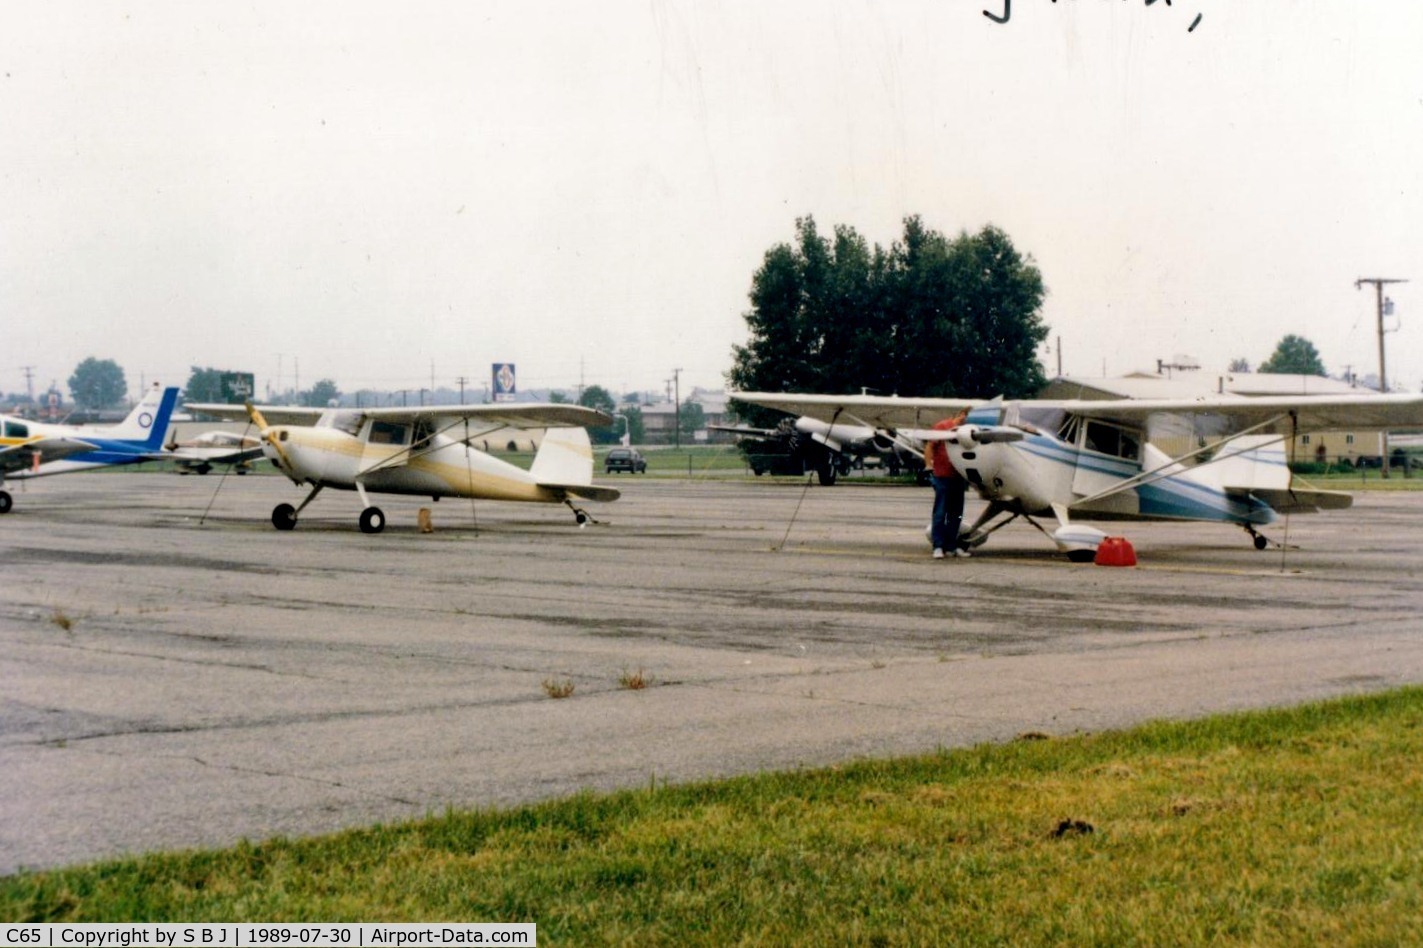 Plymouth Municipal Airport (C65) - The Plymouth ramp with view to the west.